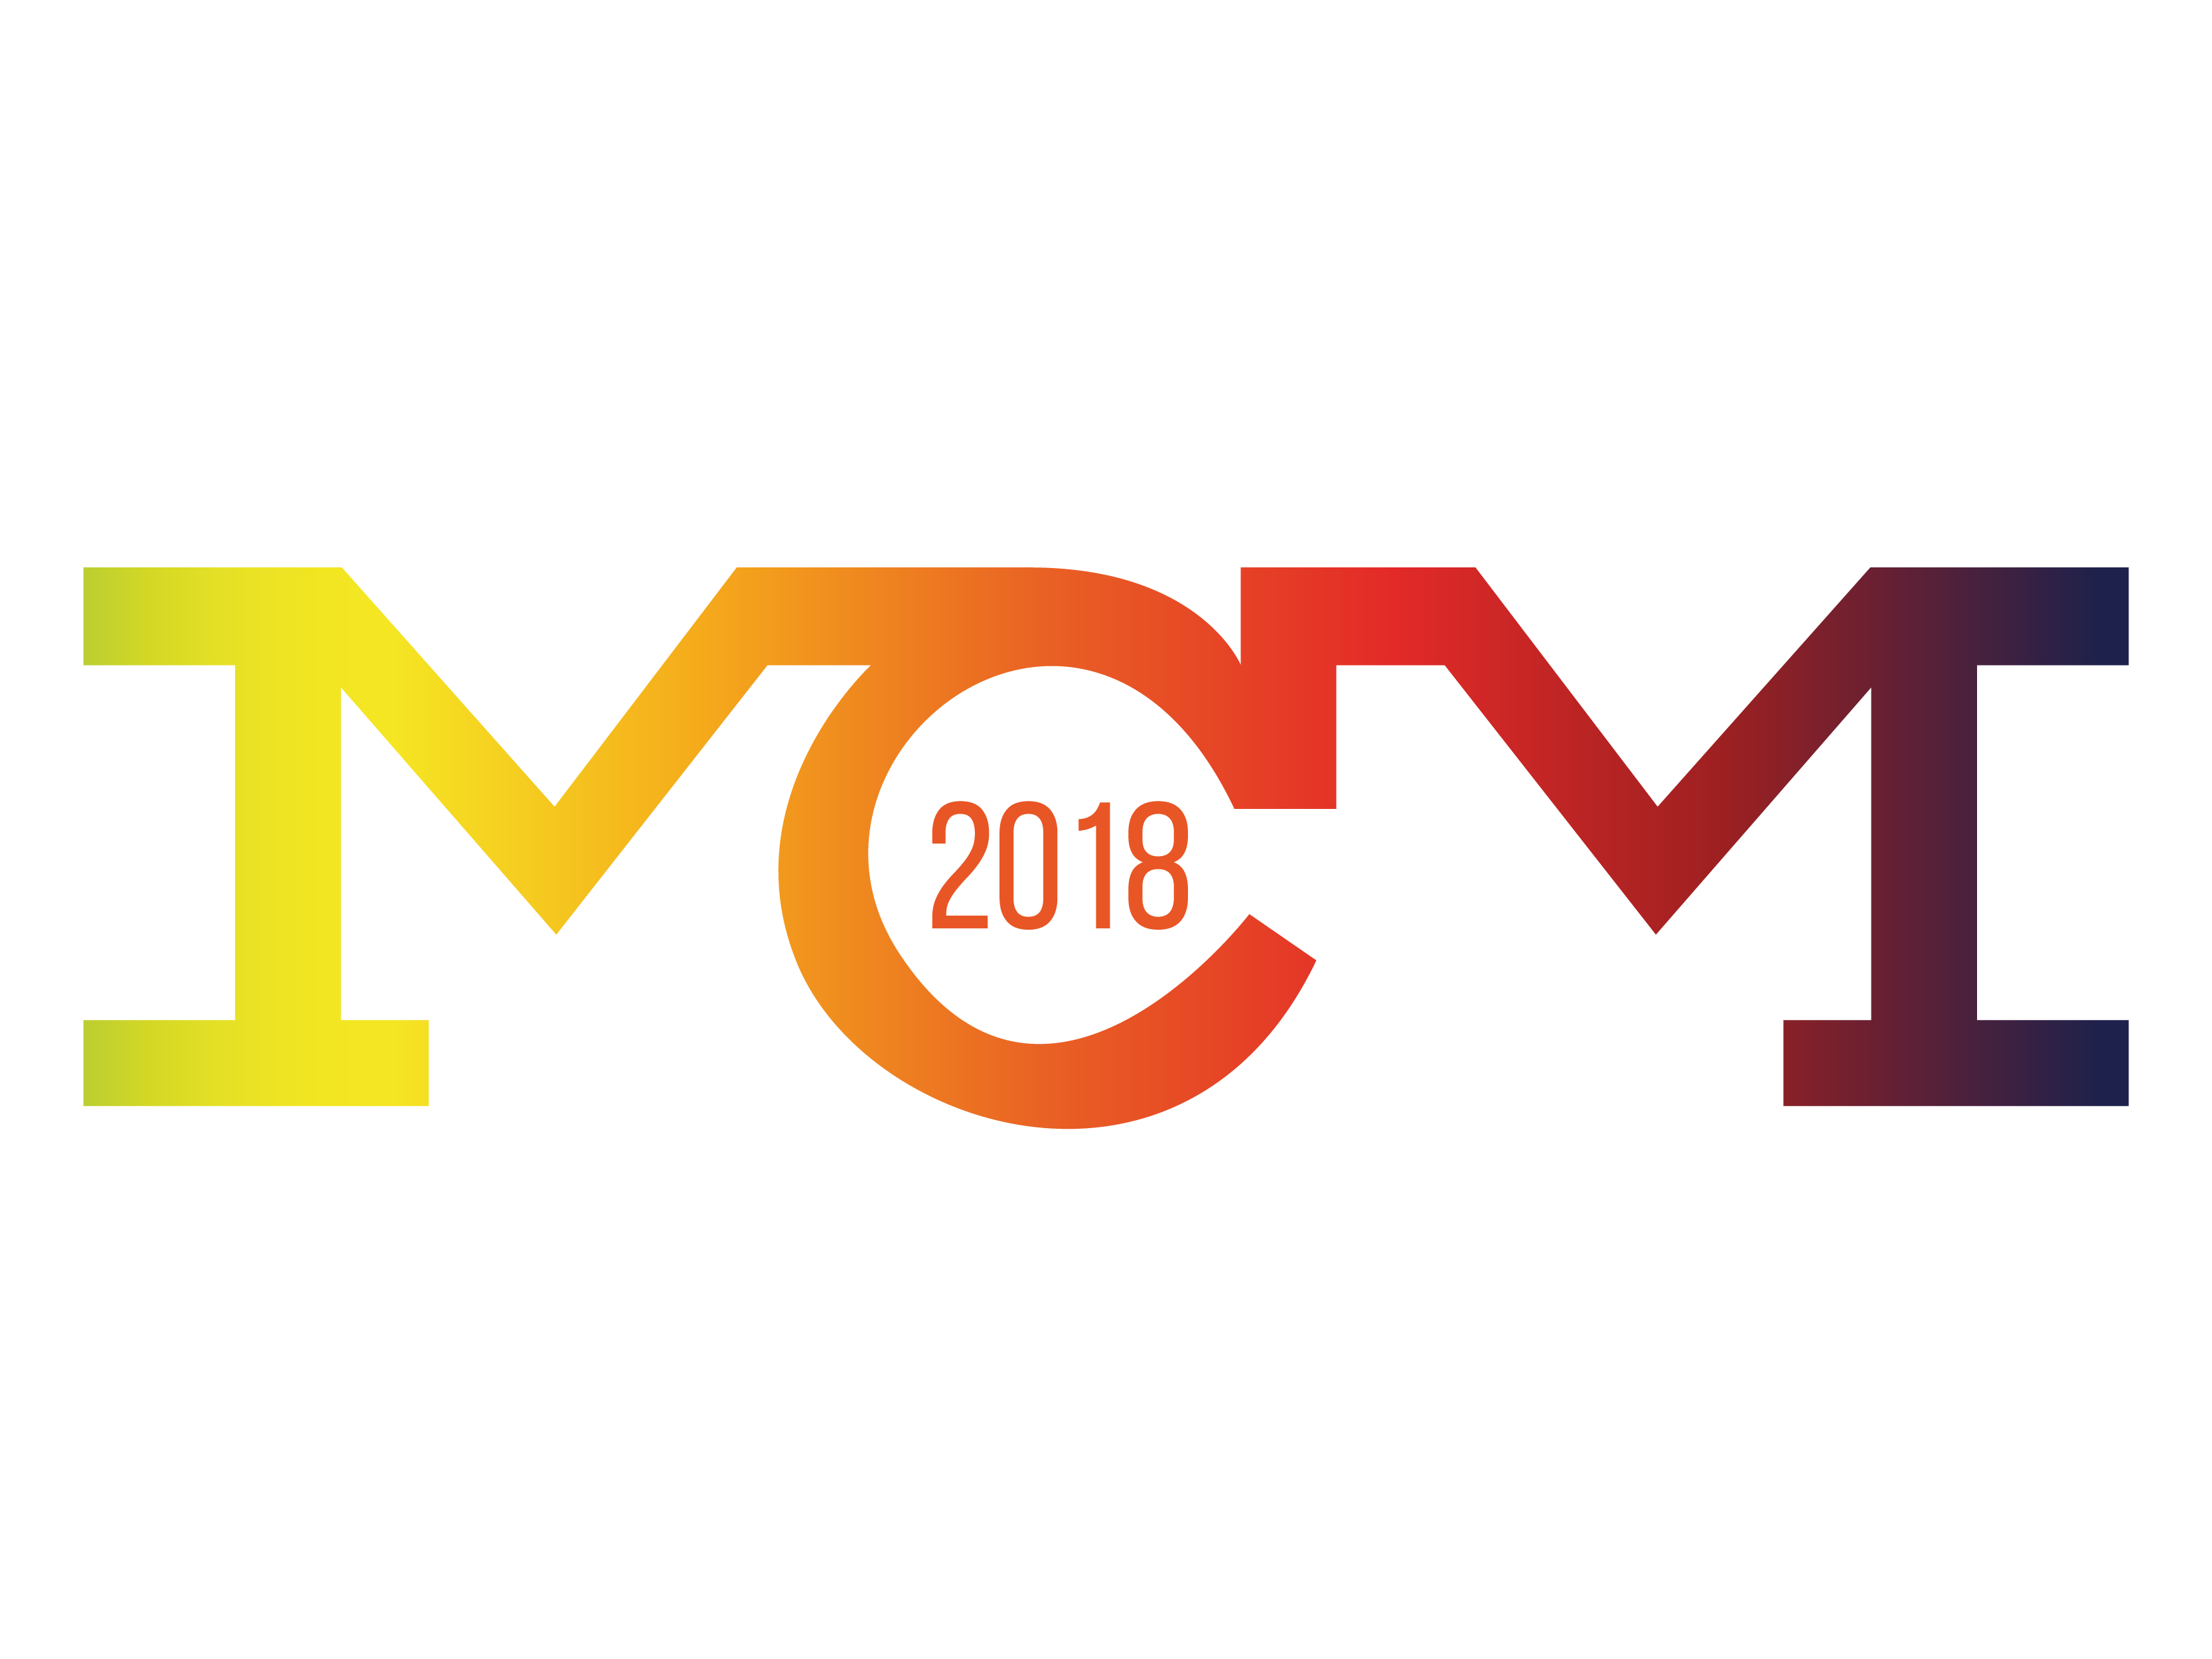 4th World Congress on Mechanical, Chemical, and Material Engineering (MCM'18)